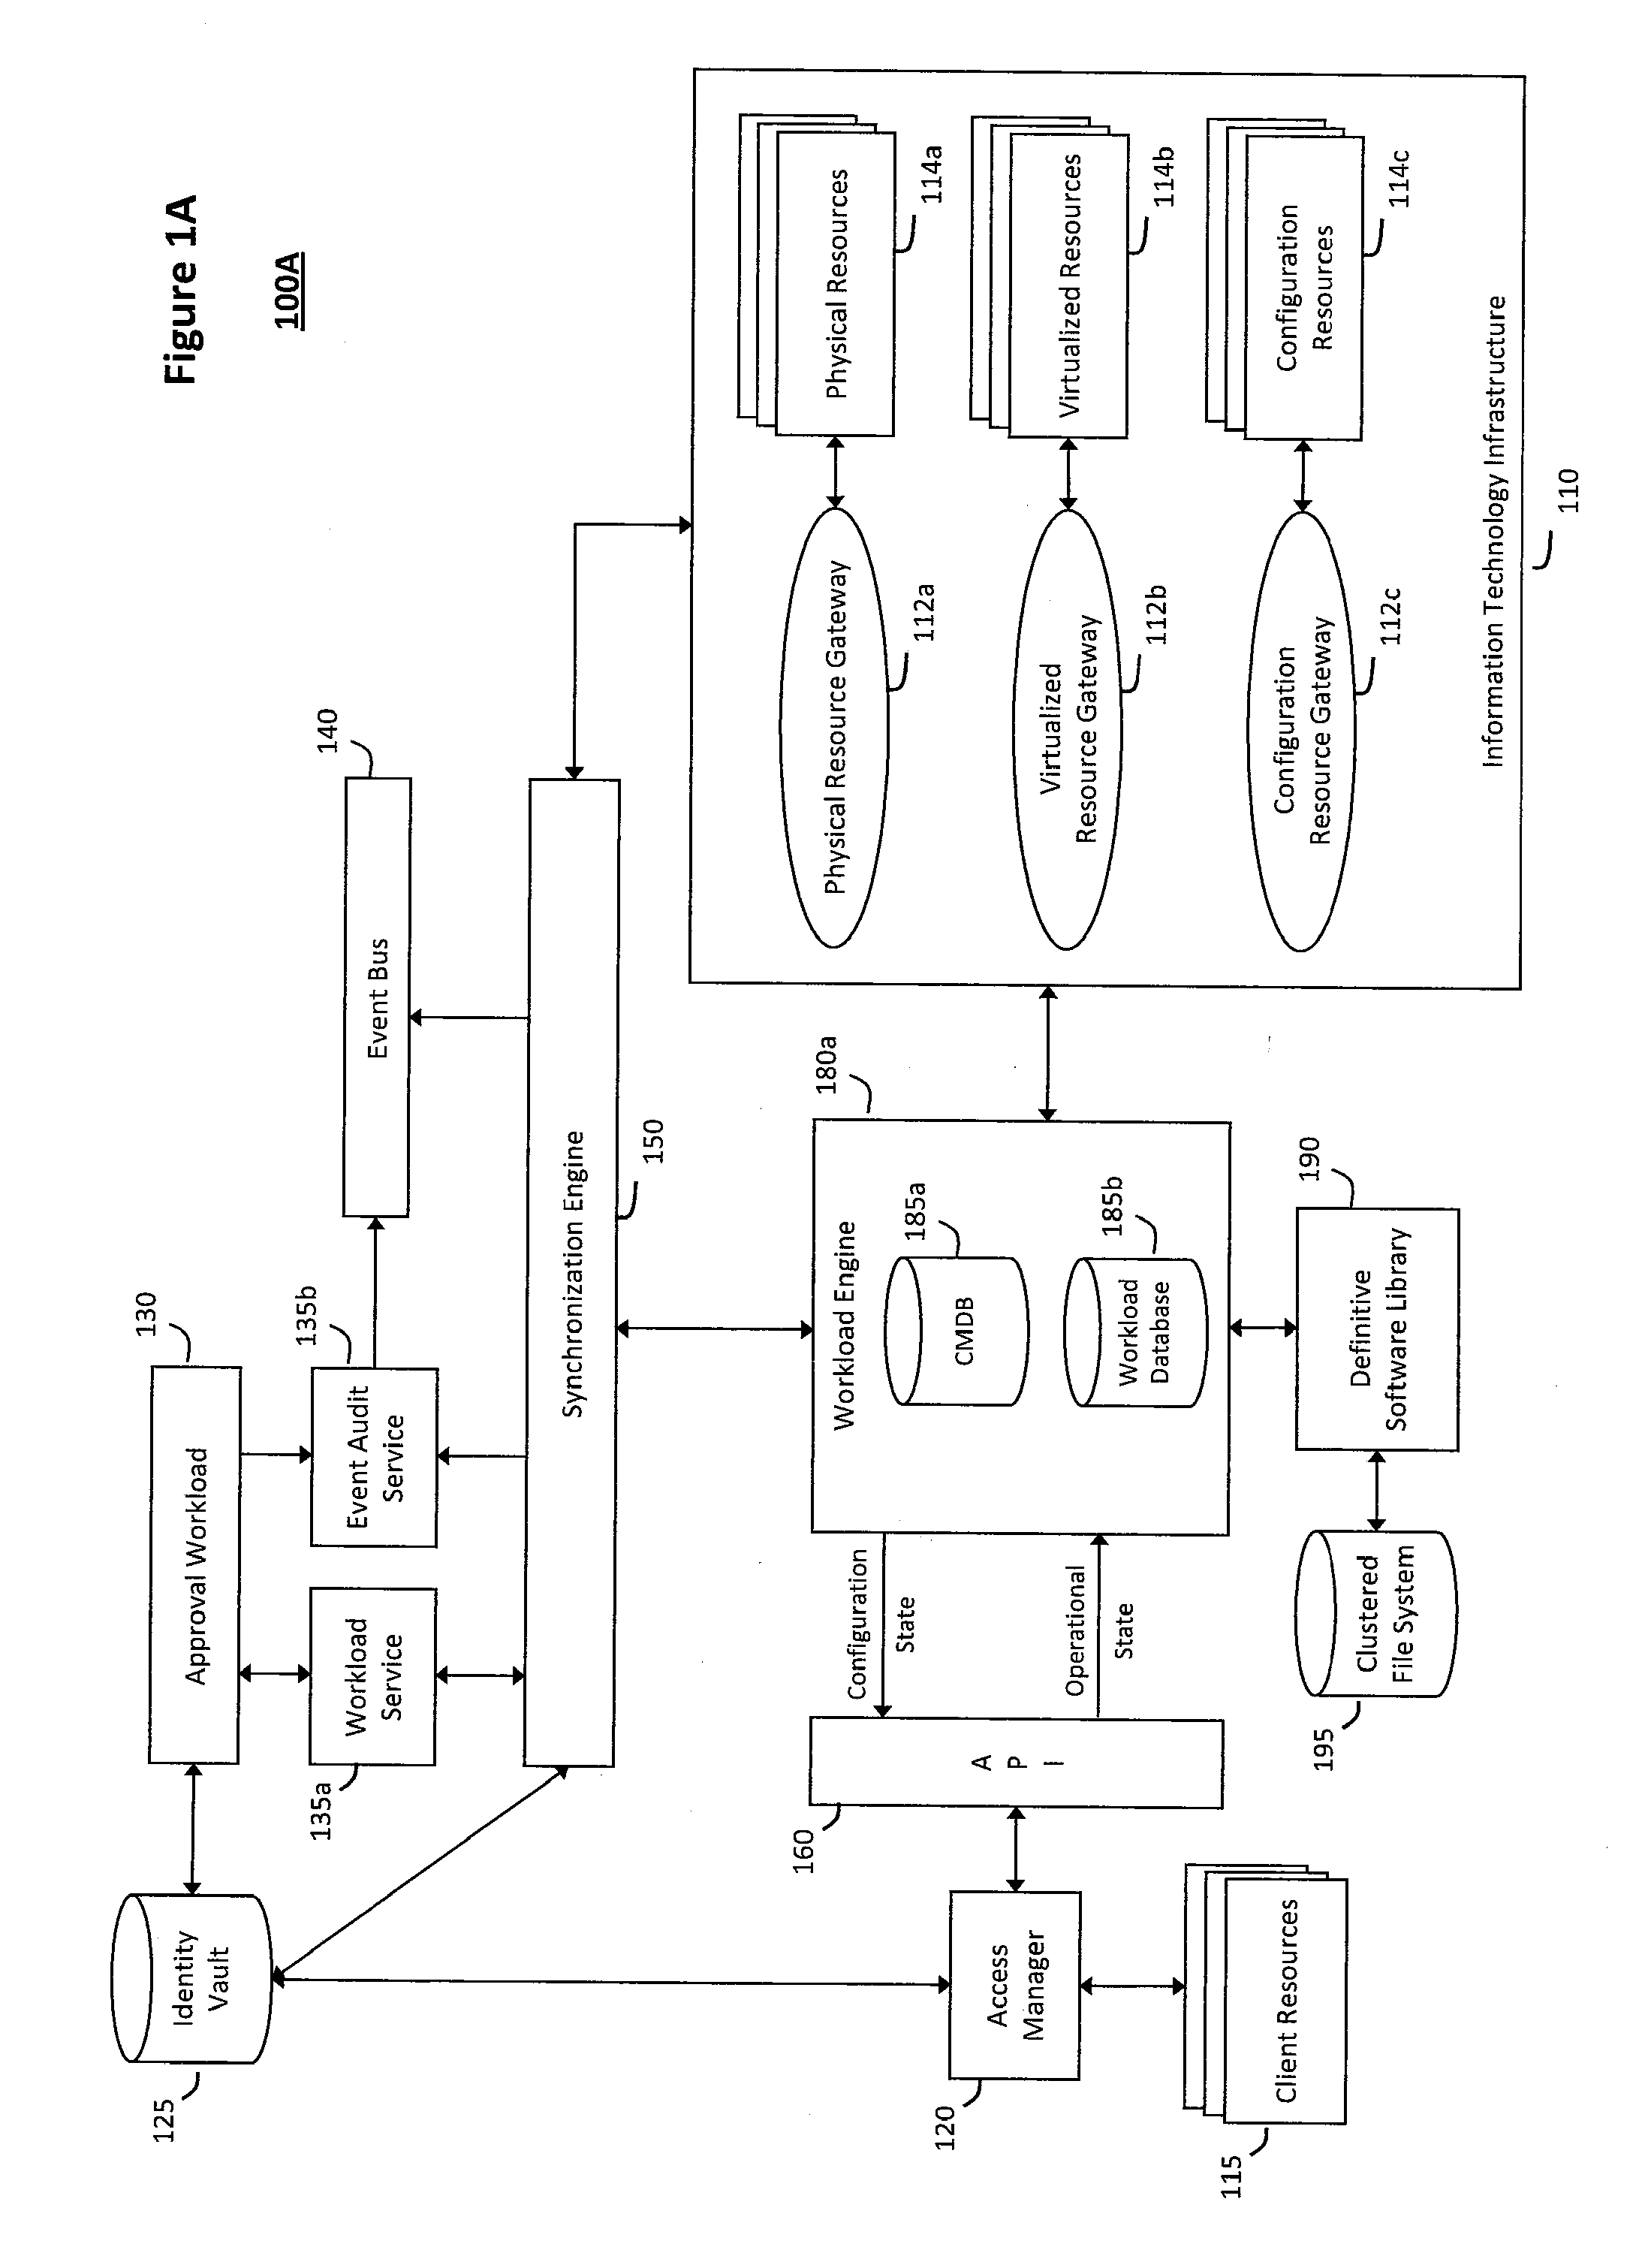 System and method for providing annotated service blueprints in an intelligent workload management system